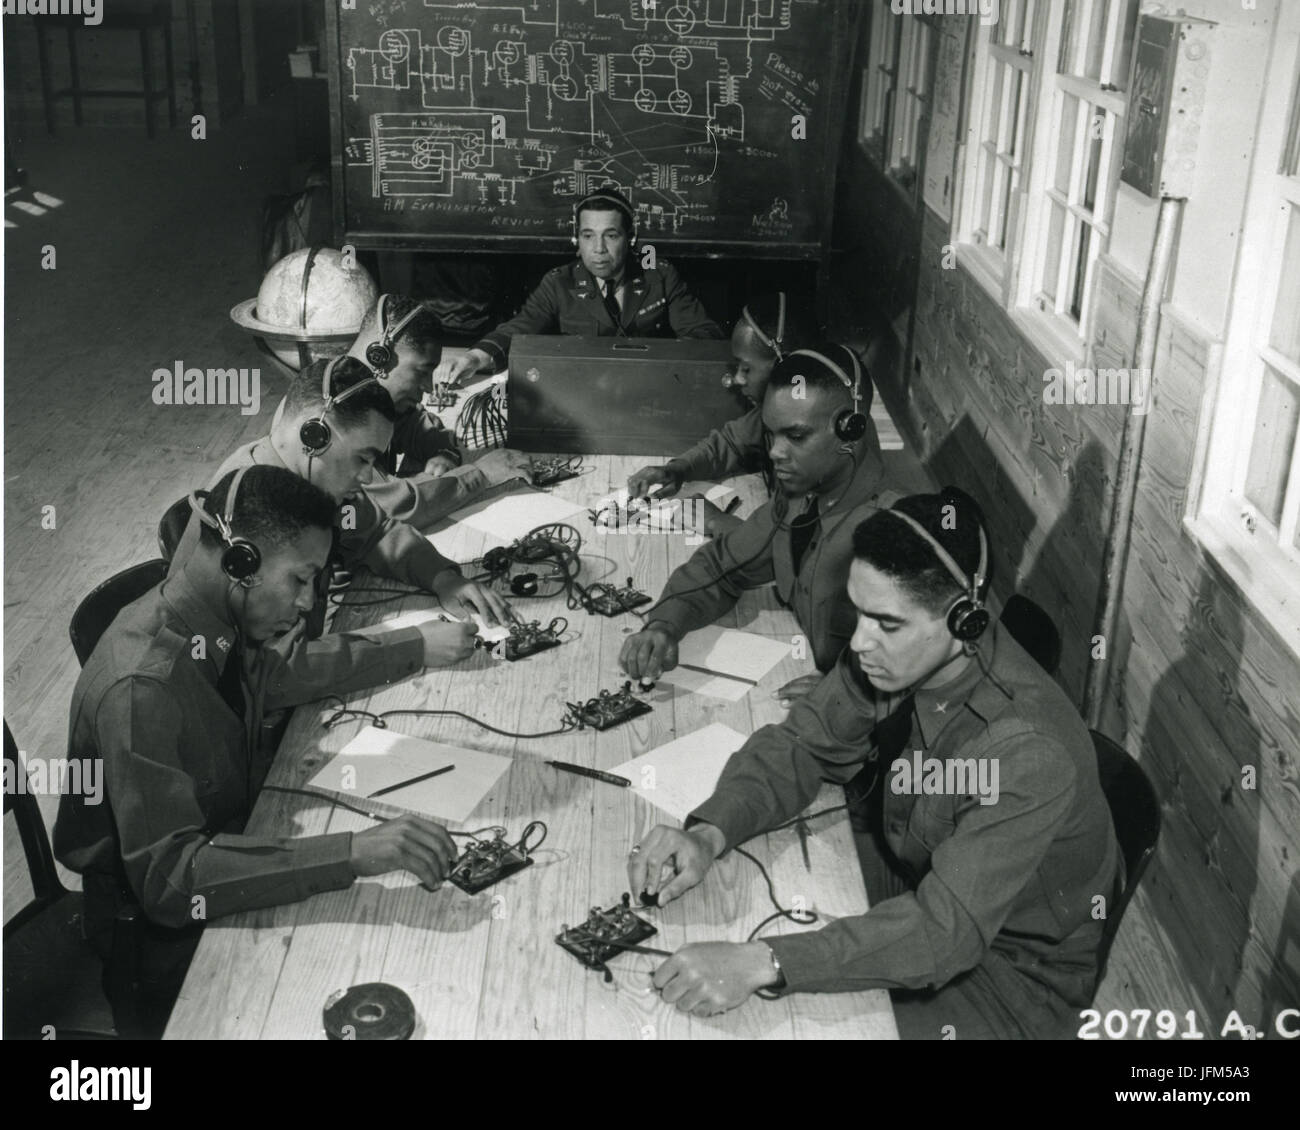 January 1942, Tuskegee, Alabama - Basic and advanced flying school for Negro Air Corps cadets. In the center is Capt. Roy F. Morse, Air Corps....He is teaching the cadets how to send and receive code. One the left from front to rear: James B. Knighten, Lee Rayford, and C.H. Flowers. On the right, George Levi Knox, Sherman White and Mac Ross. Stock Photo